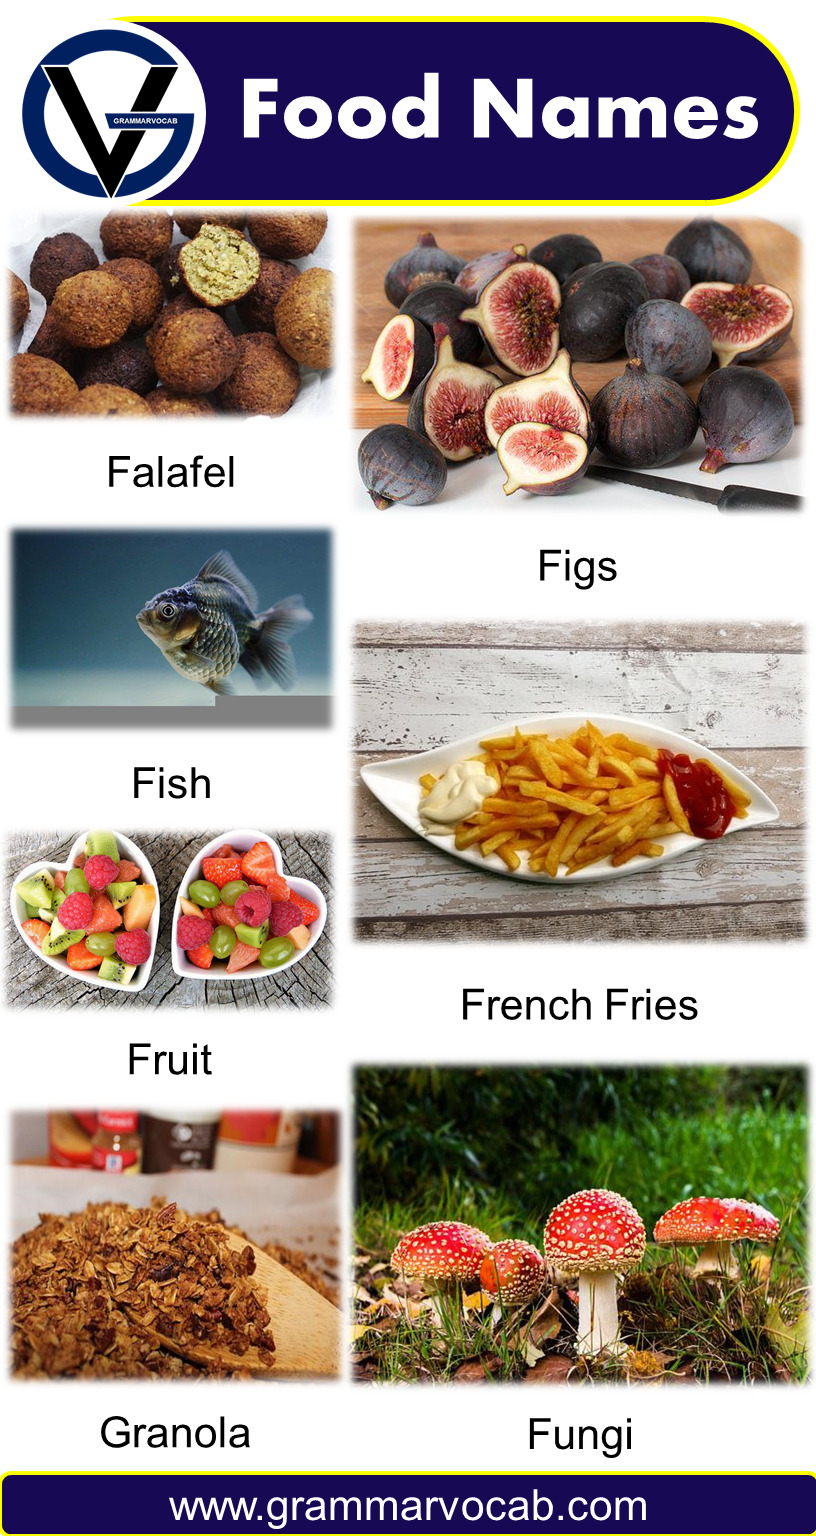 Foods From A To Z